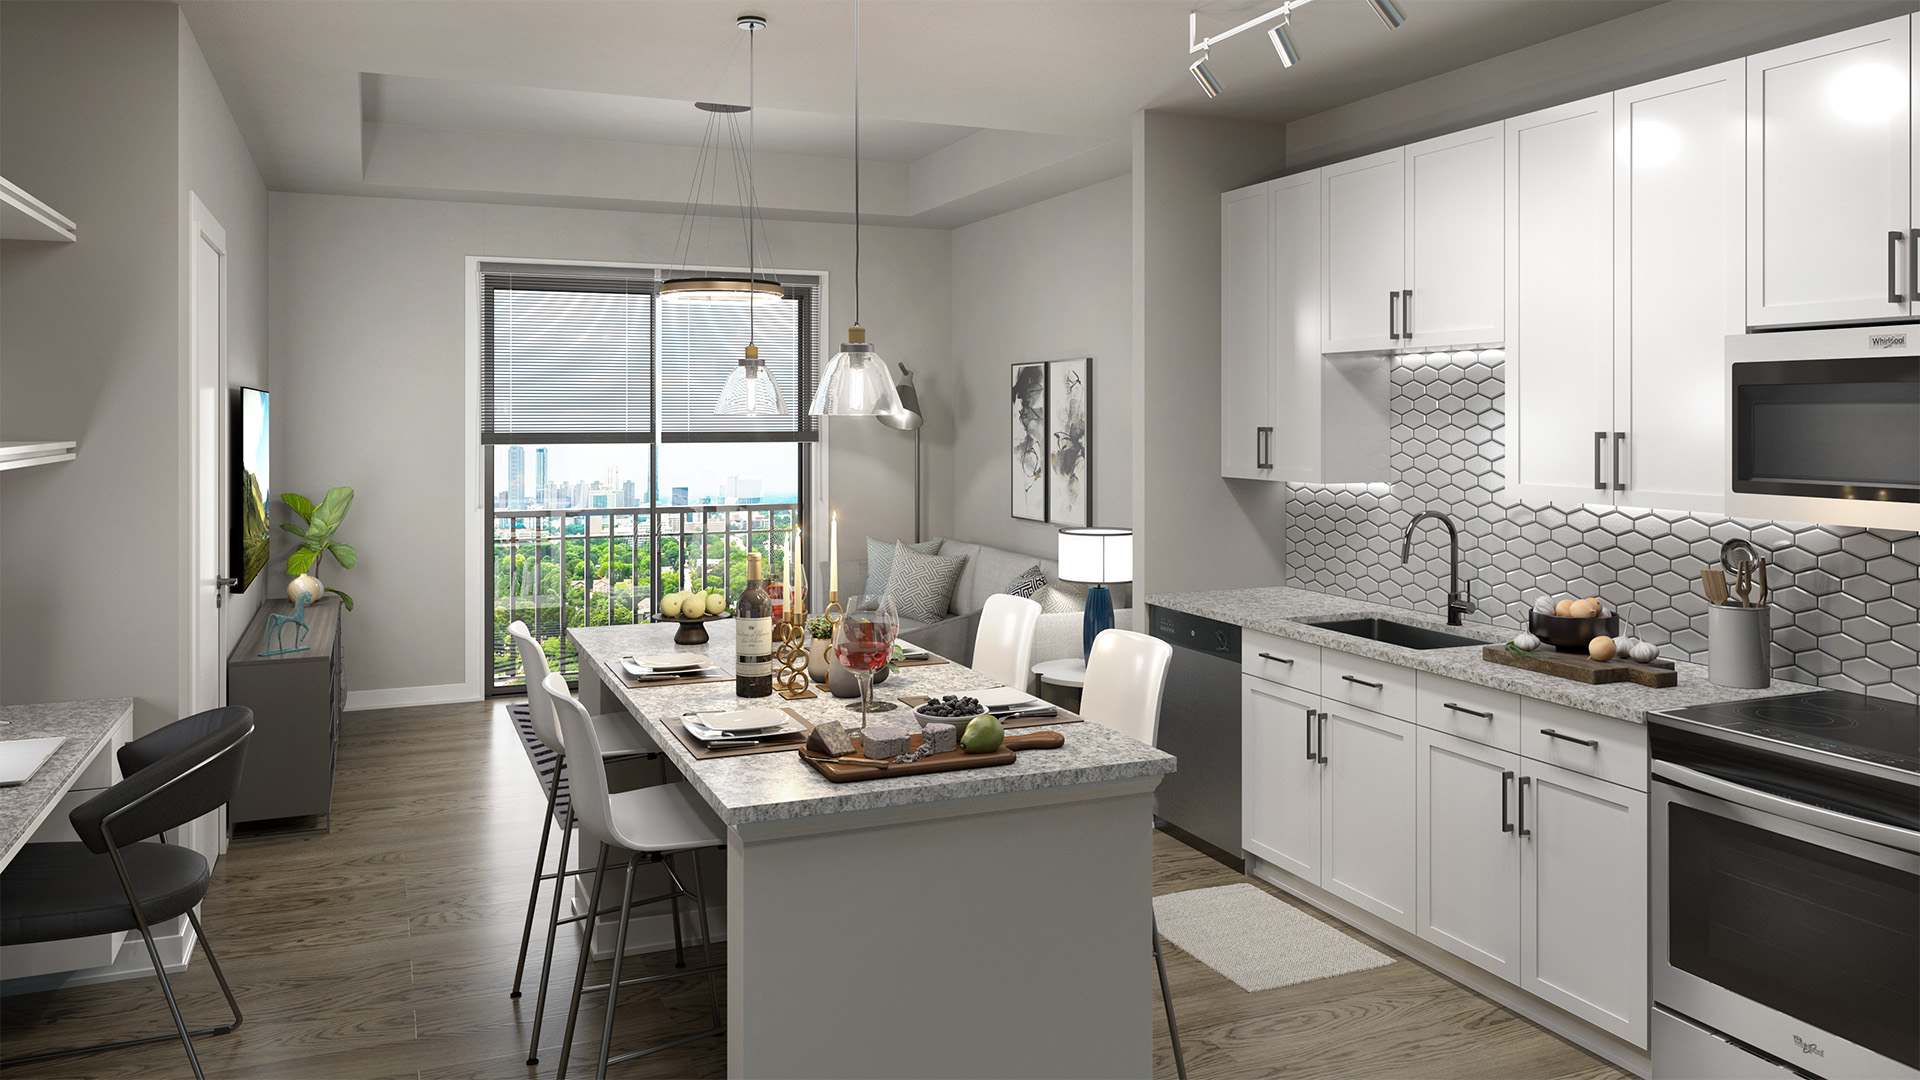 The Heights at Millcroft - Floorplan - Carriage Home - 1A